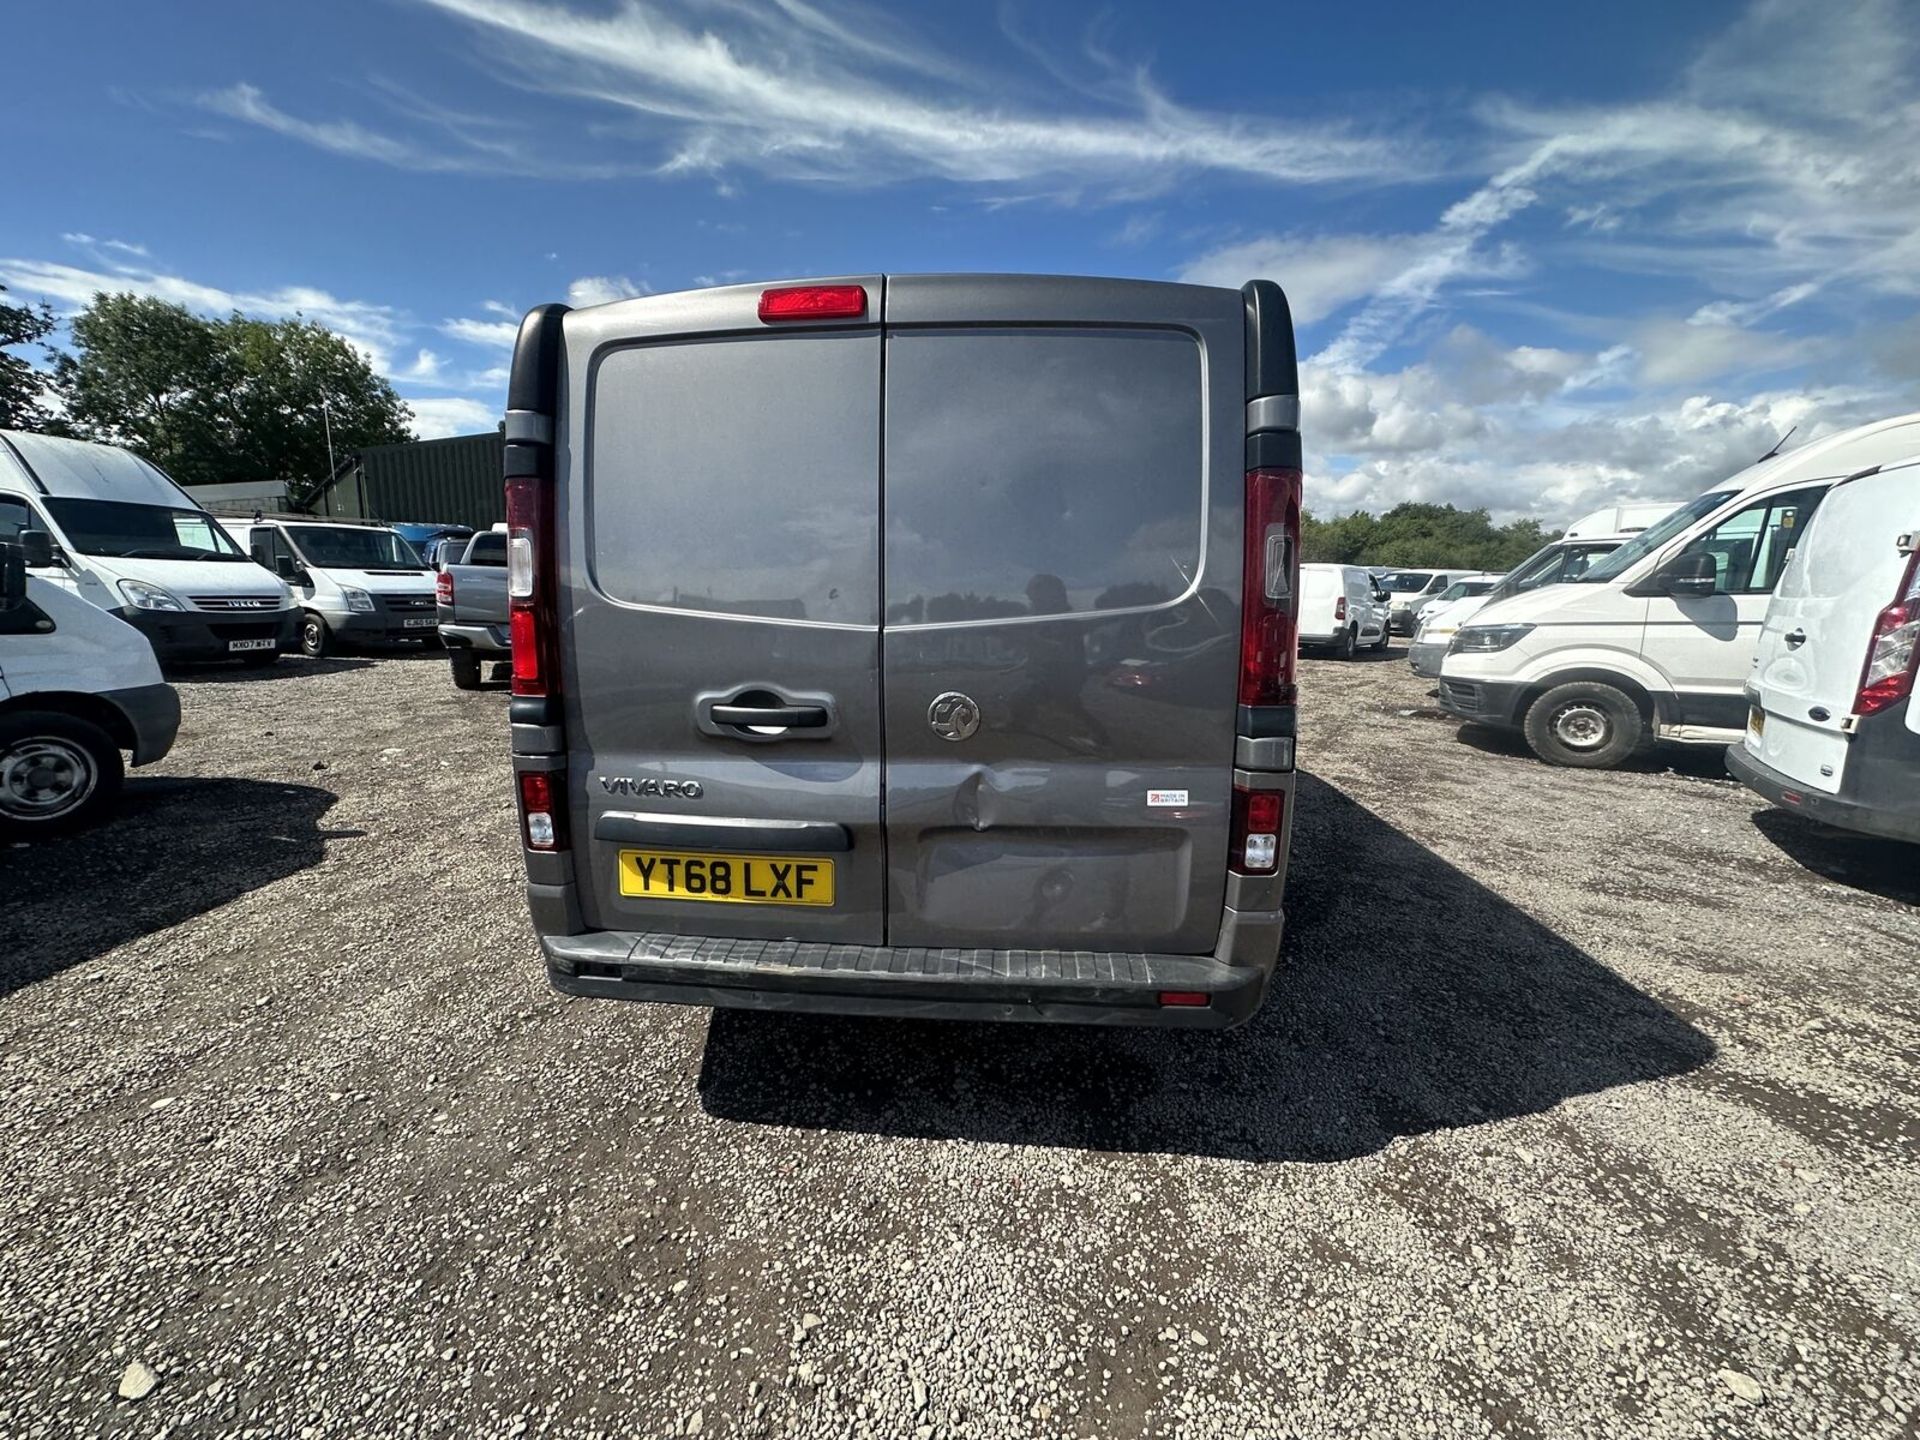 **(ONLY 70K MILEAGE)** MANUAL MARVEL: 2018 VAUXHALL VIVARO - CLEAR HPI, 0 FORMER KEEPERS - Image 13 of 15